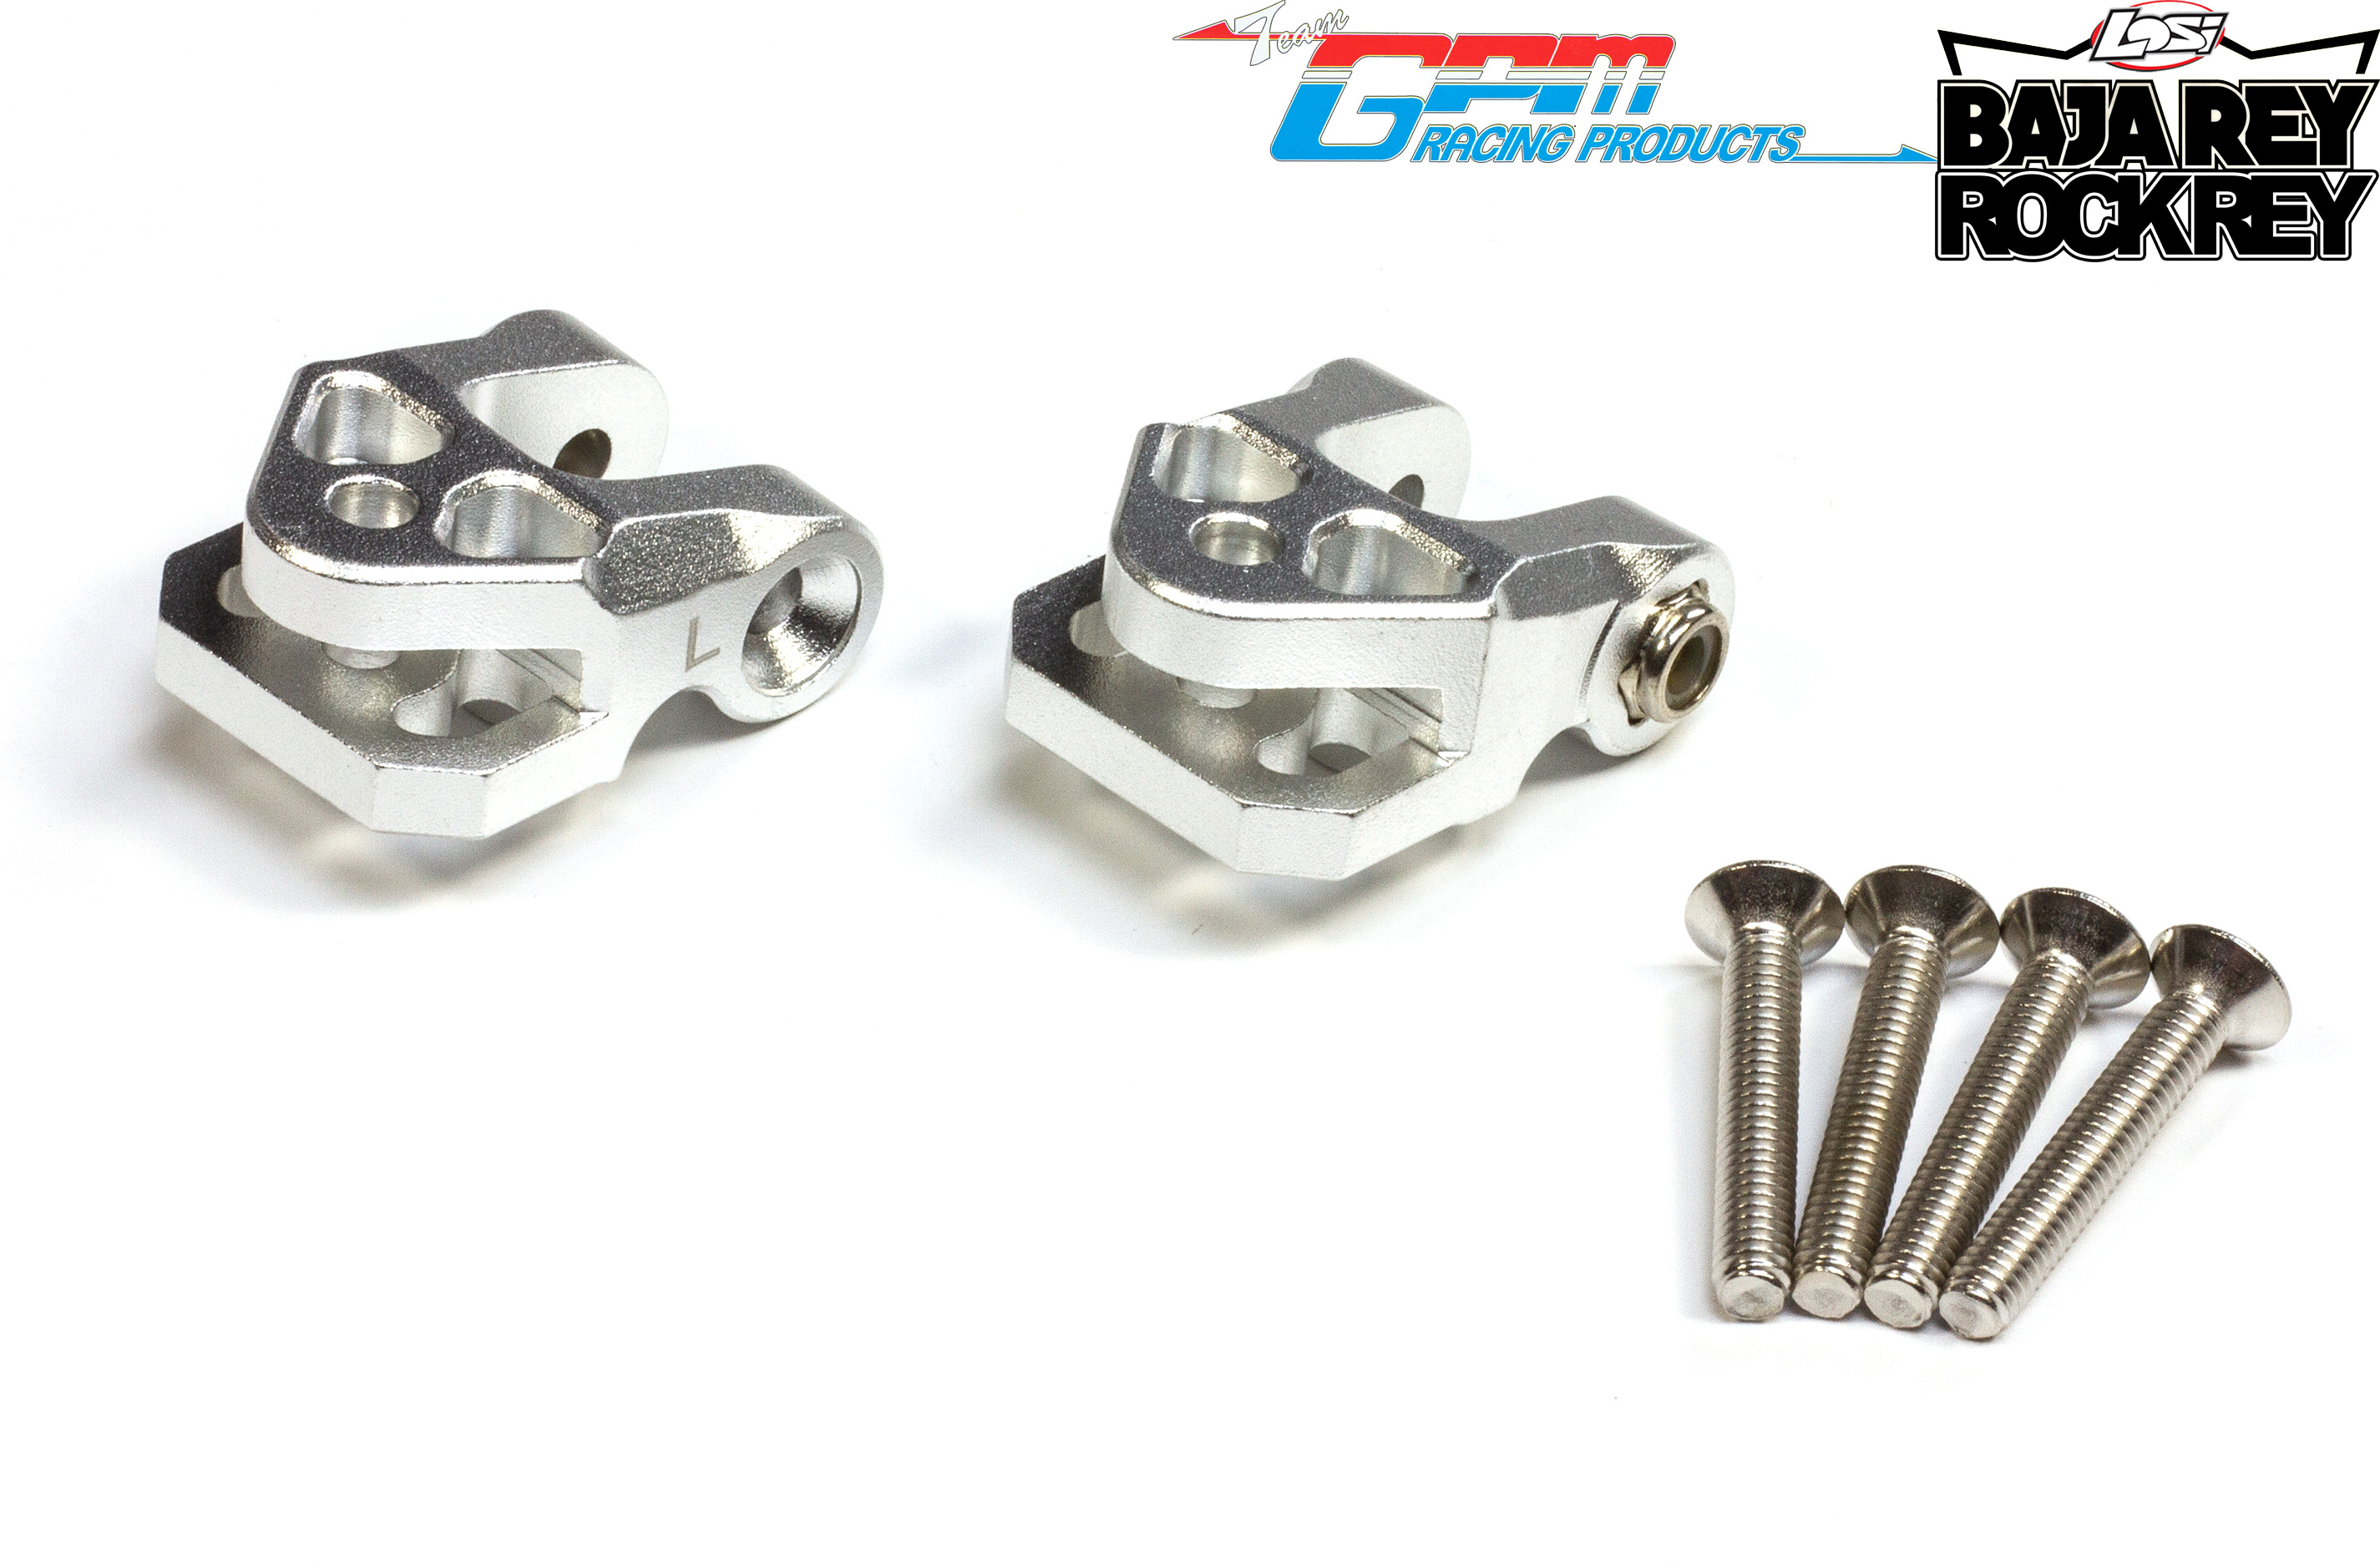 SB009 GPM aluminum lower trailing arm mounts for Losi Super Baja Rey / 2.0 / Rock Rey, chassis side